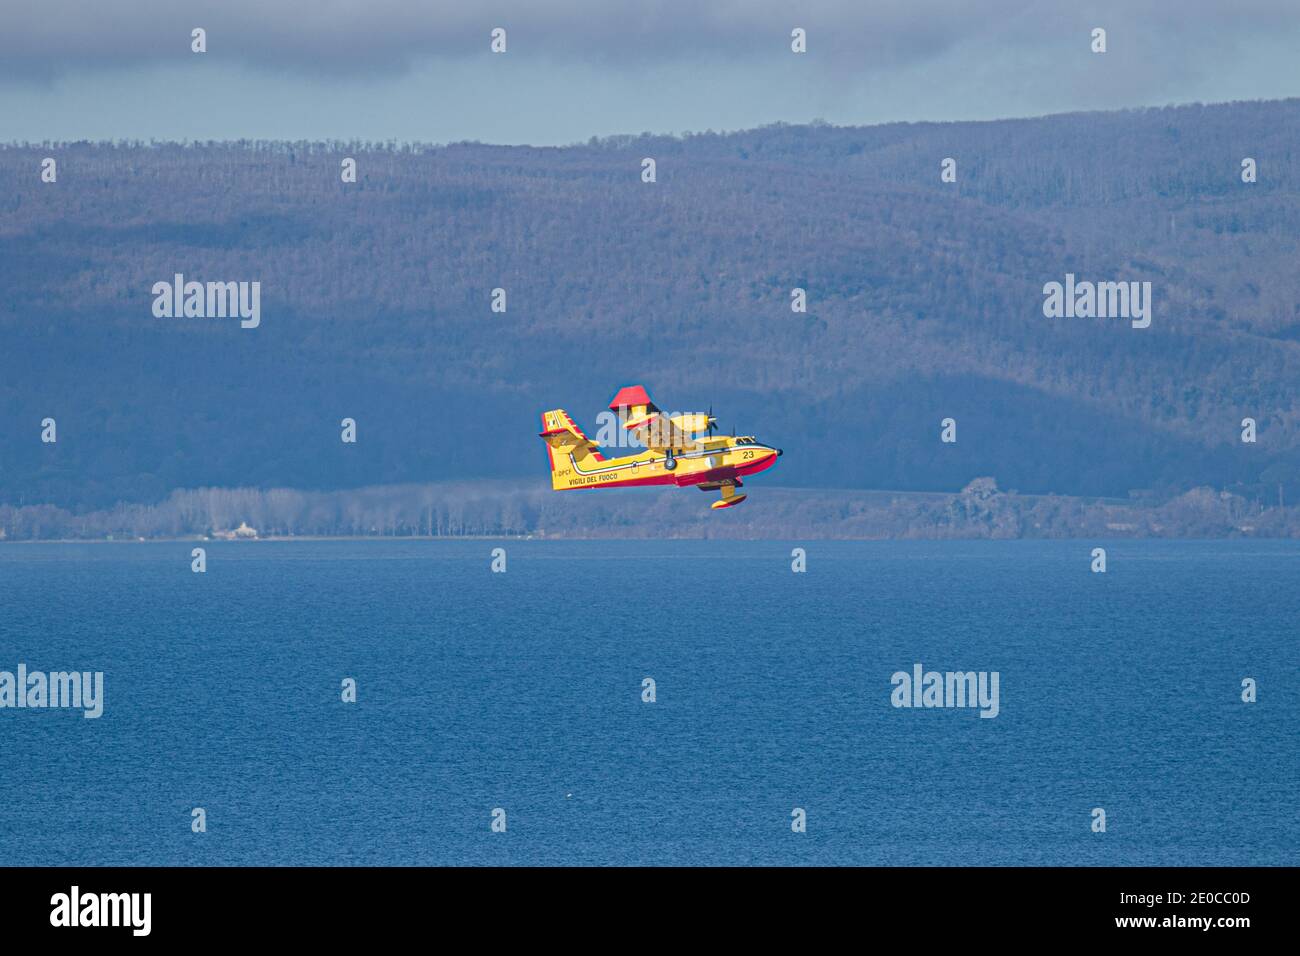 ANGUILLARA SABAZIA, ITALY  31 December 2020. A Bombardier 415 (Canadair CL-415) fire and rescue amphibious water bomber   making practice runs  as it picks up water from  lake Bracciano. Credit: amer ghazzal/Alamy Live News Stock Photo